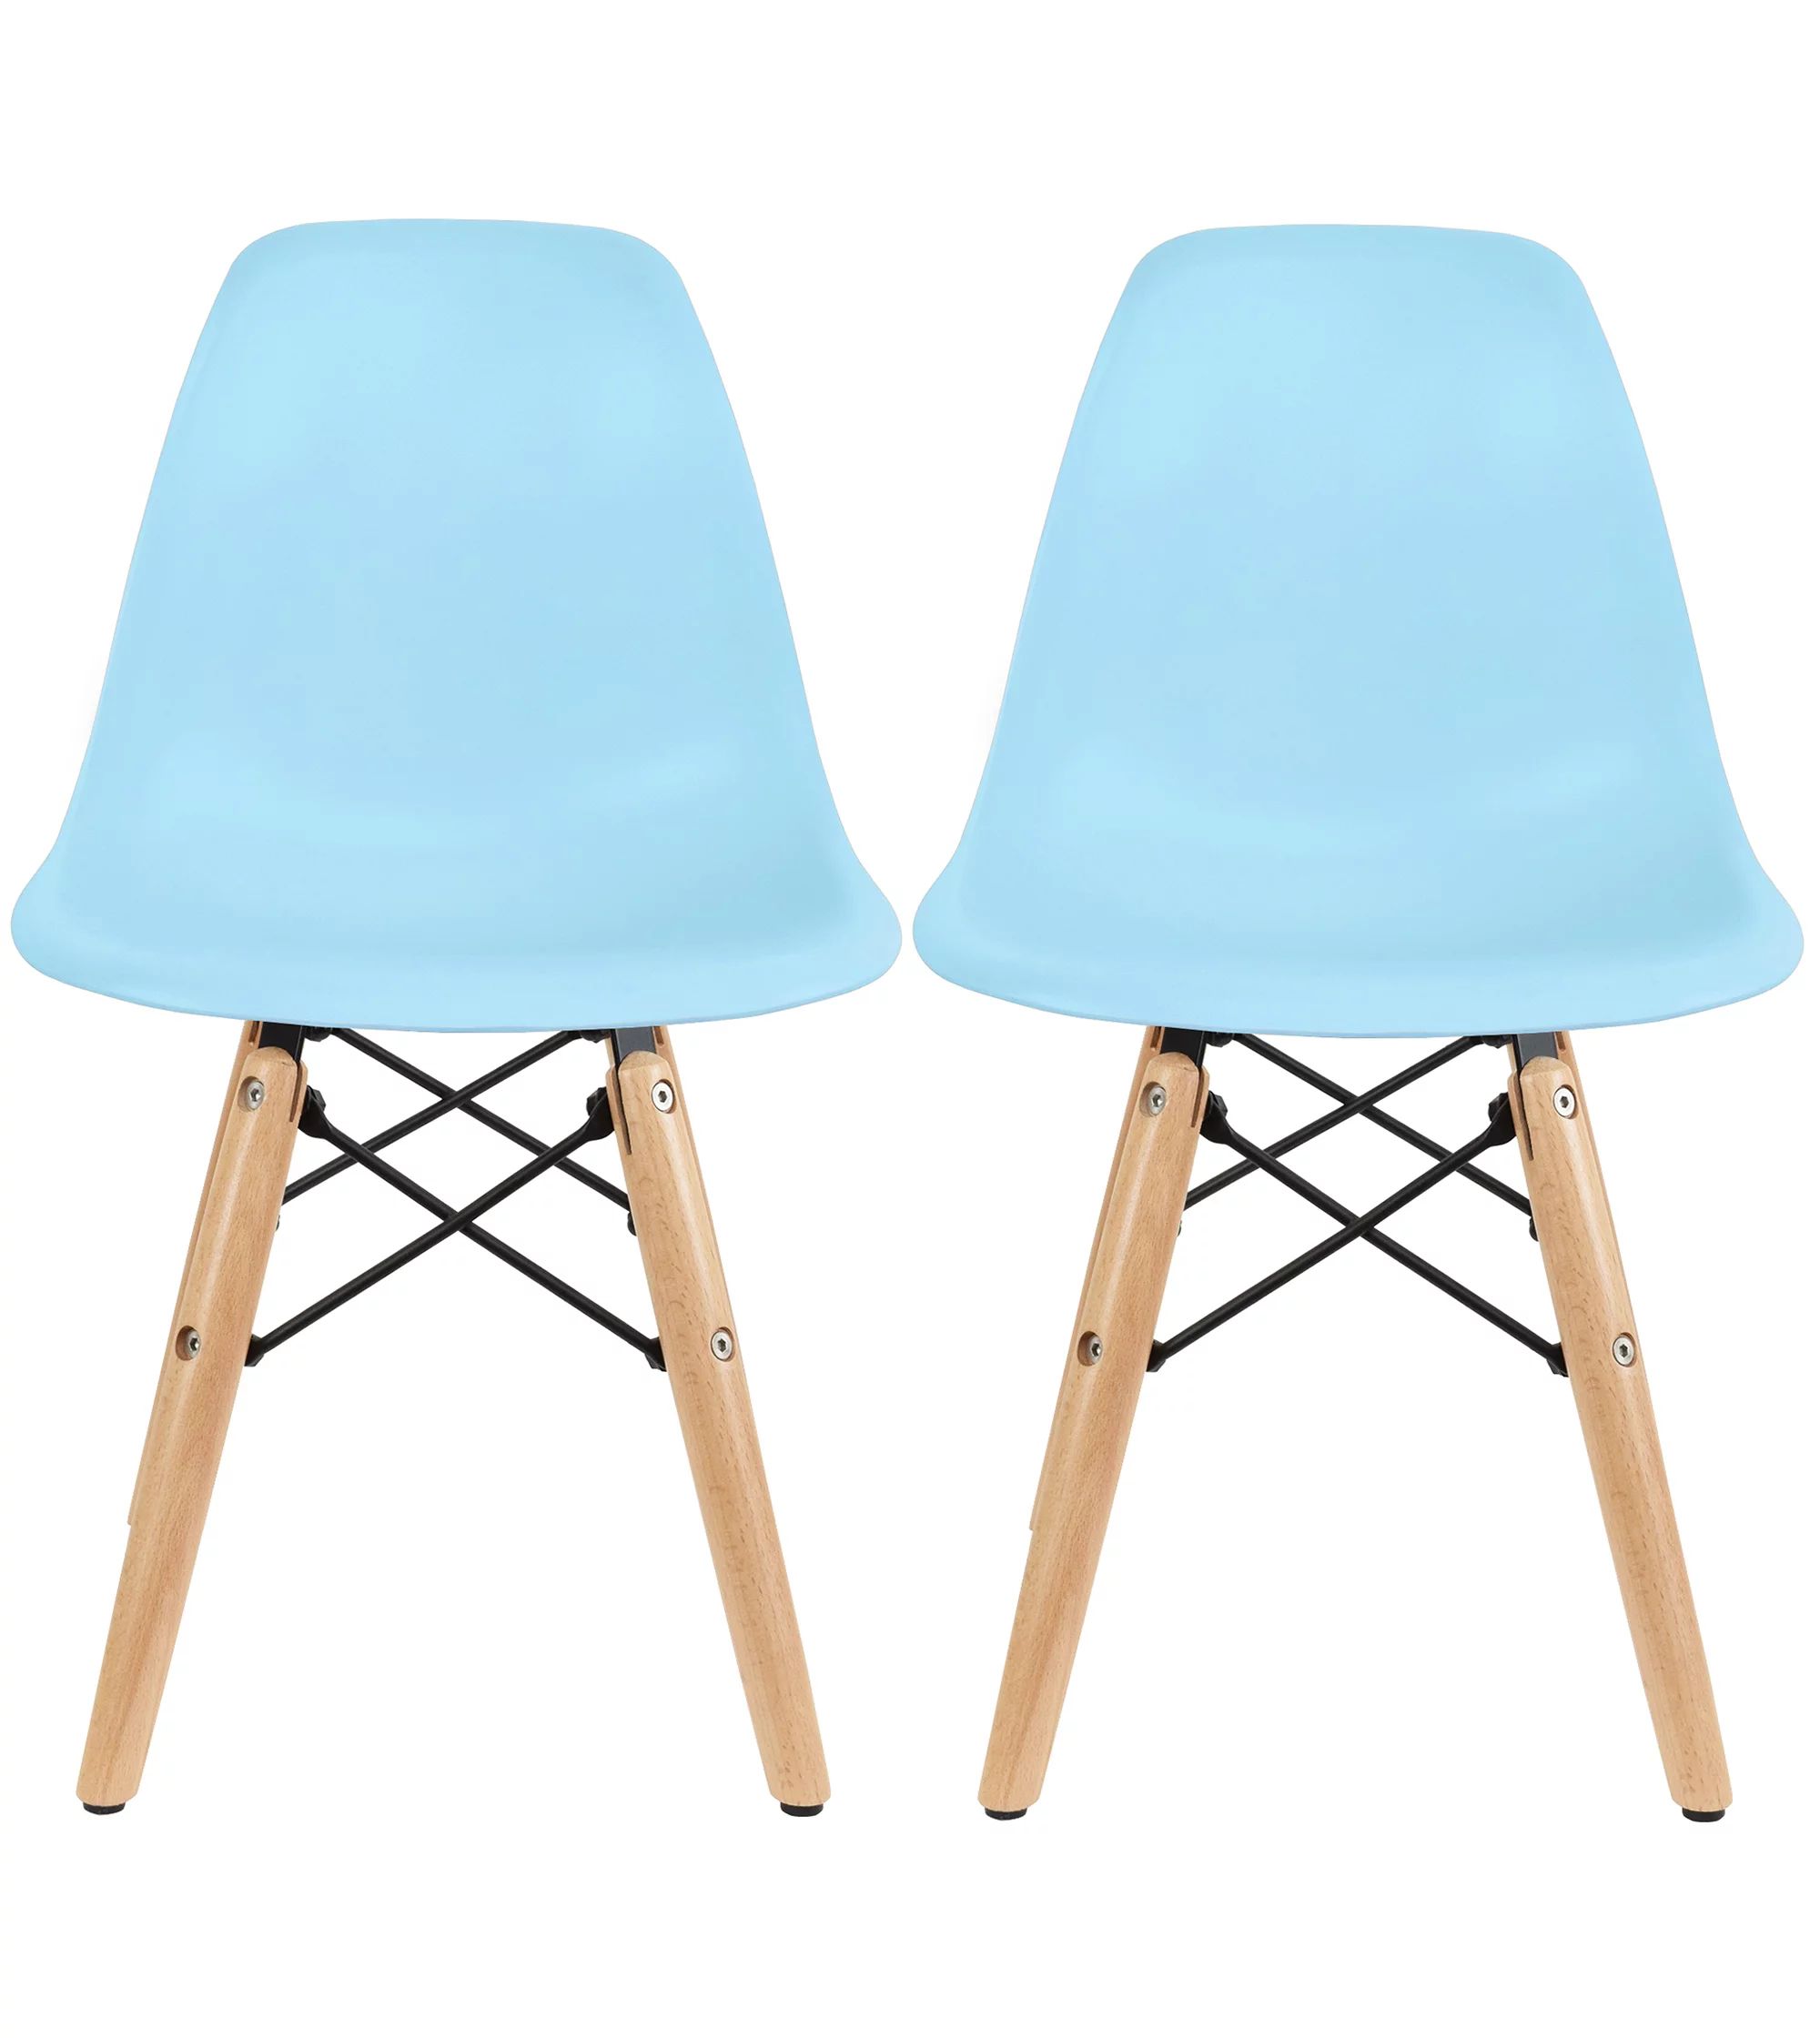 2xhome - Set of 2 - Blue - Toddler Kids Size Plastic Side Chair Black Seat Natural Wood Wooden Le... | Walmart (US)